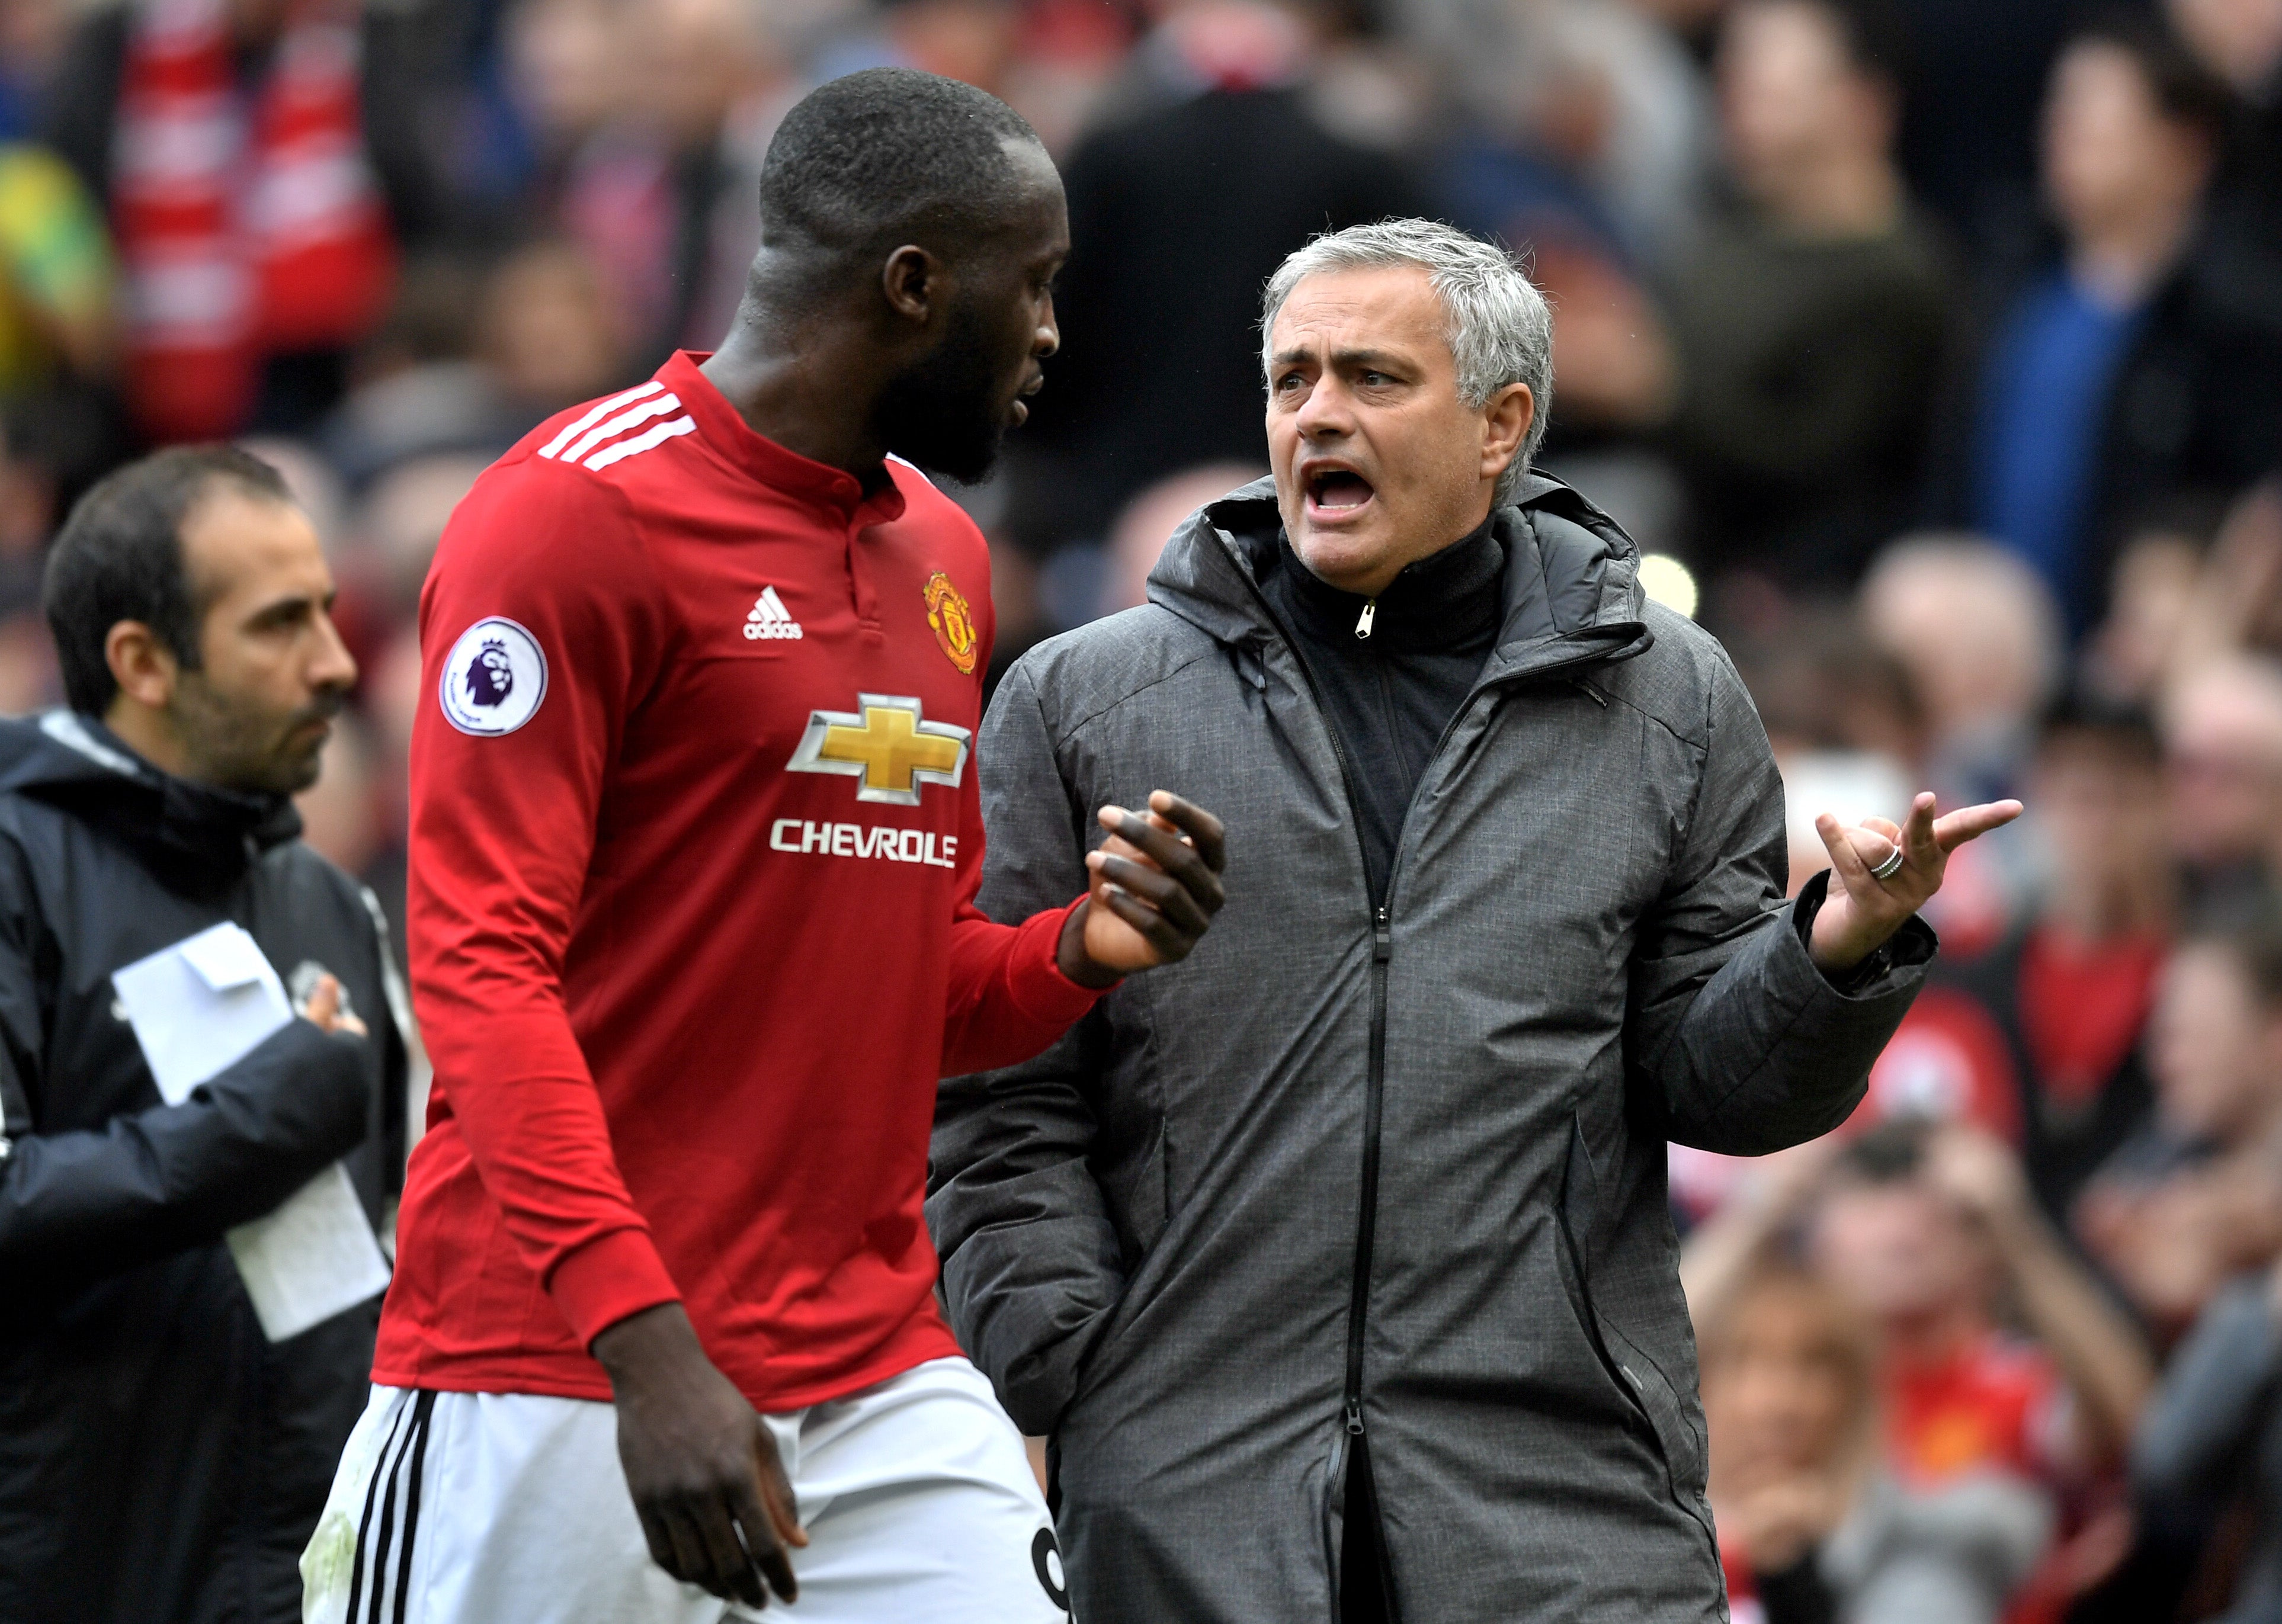 Romelu Lukaku speaks with Jose Mourinho during their time together at Manchester United